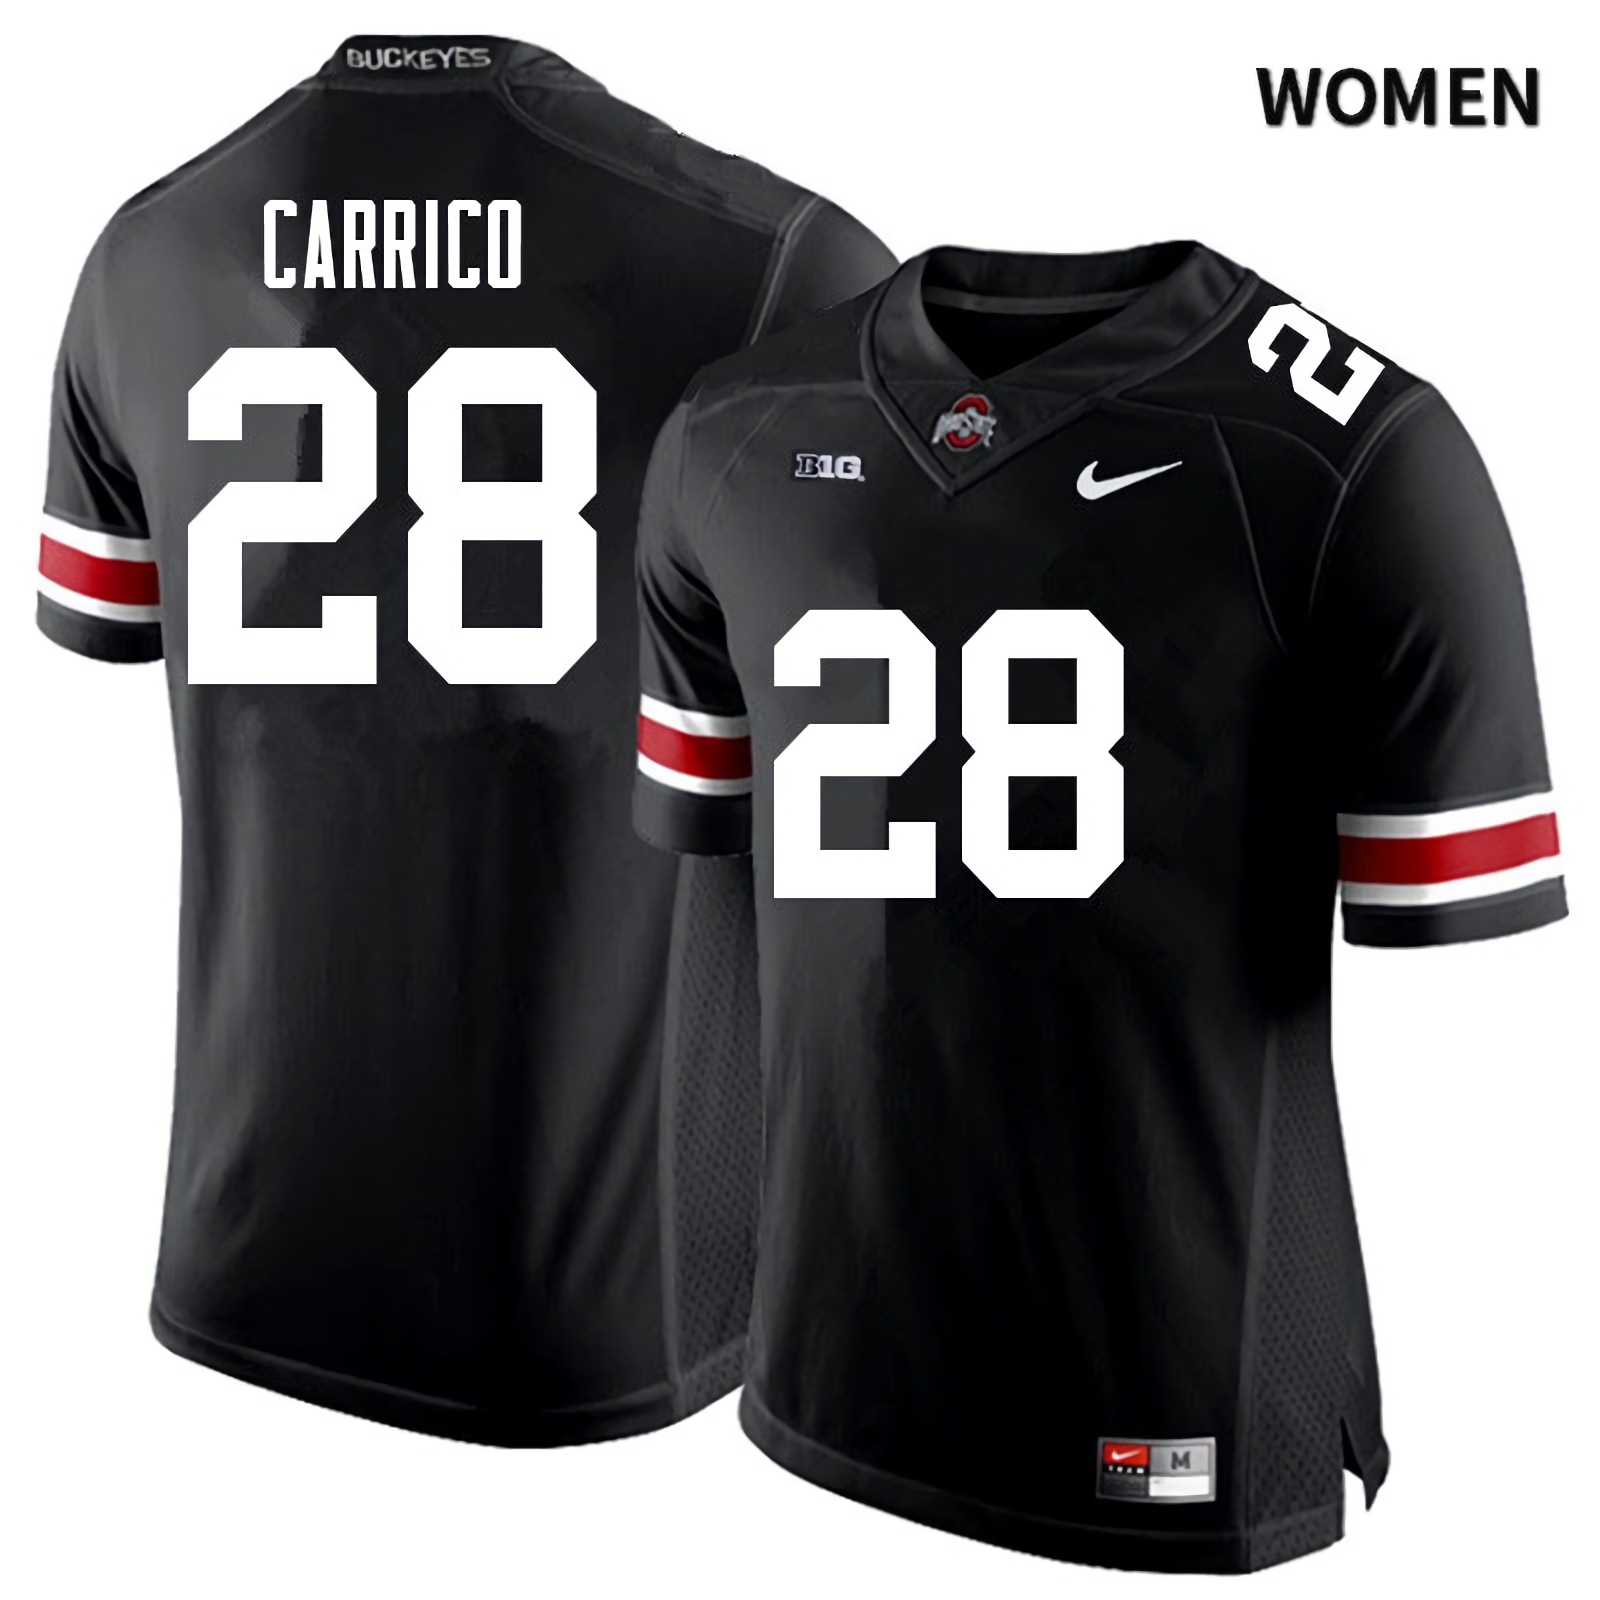 Reid Carrico Ohio State Buckeyes Women's NCAA #28 Black White Number College Stitched Football Jersey MDN0056KP